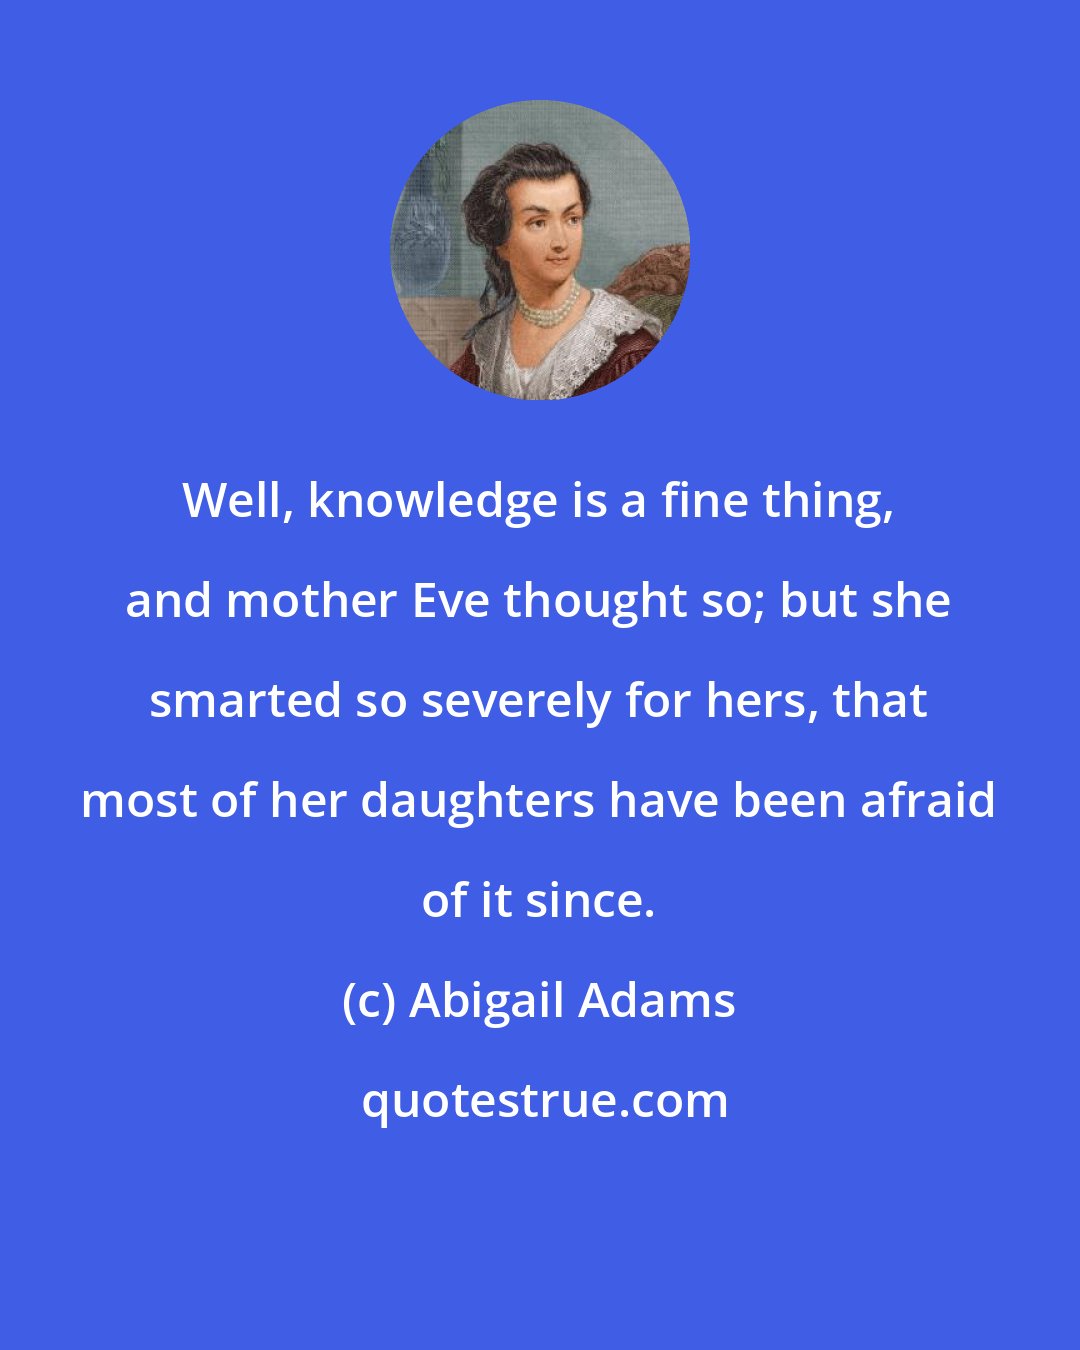 Abigail Adams: Well, knowledge is a fine thing, and mother Eve thought so; but she smarted so severely for hers, that most of her daughters have been afraid of it since.